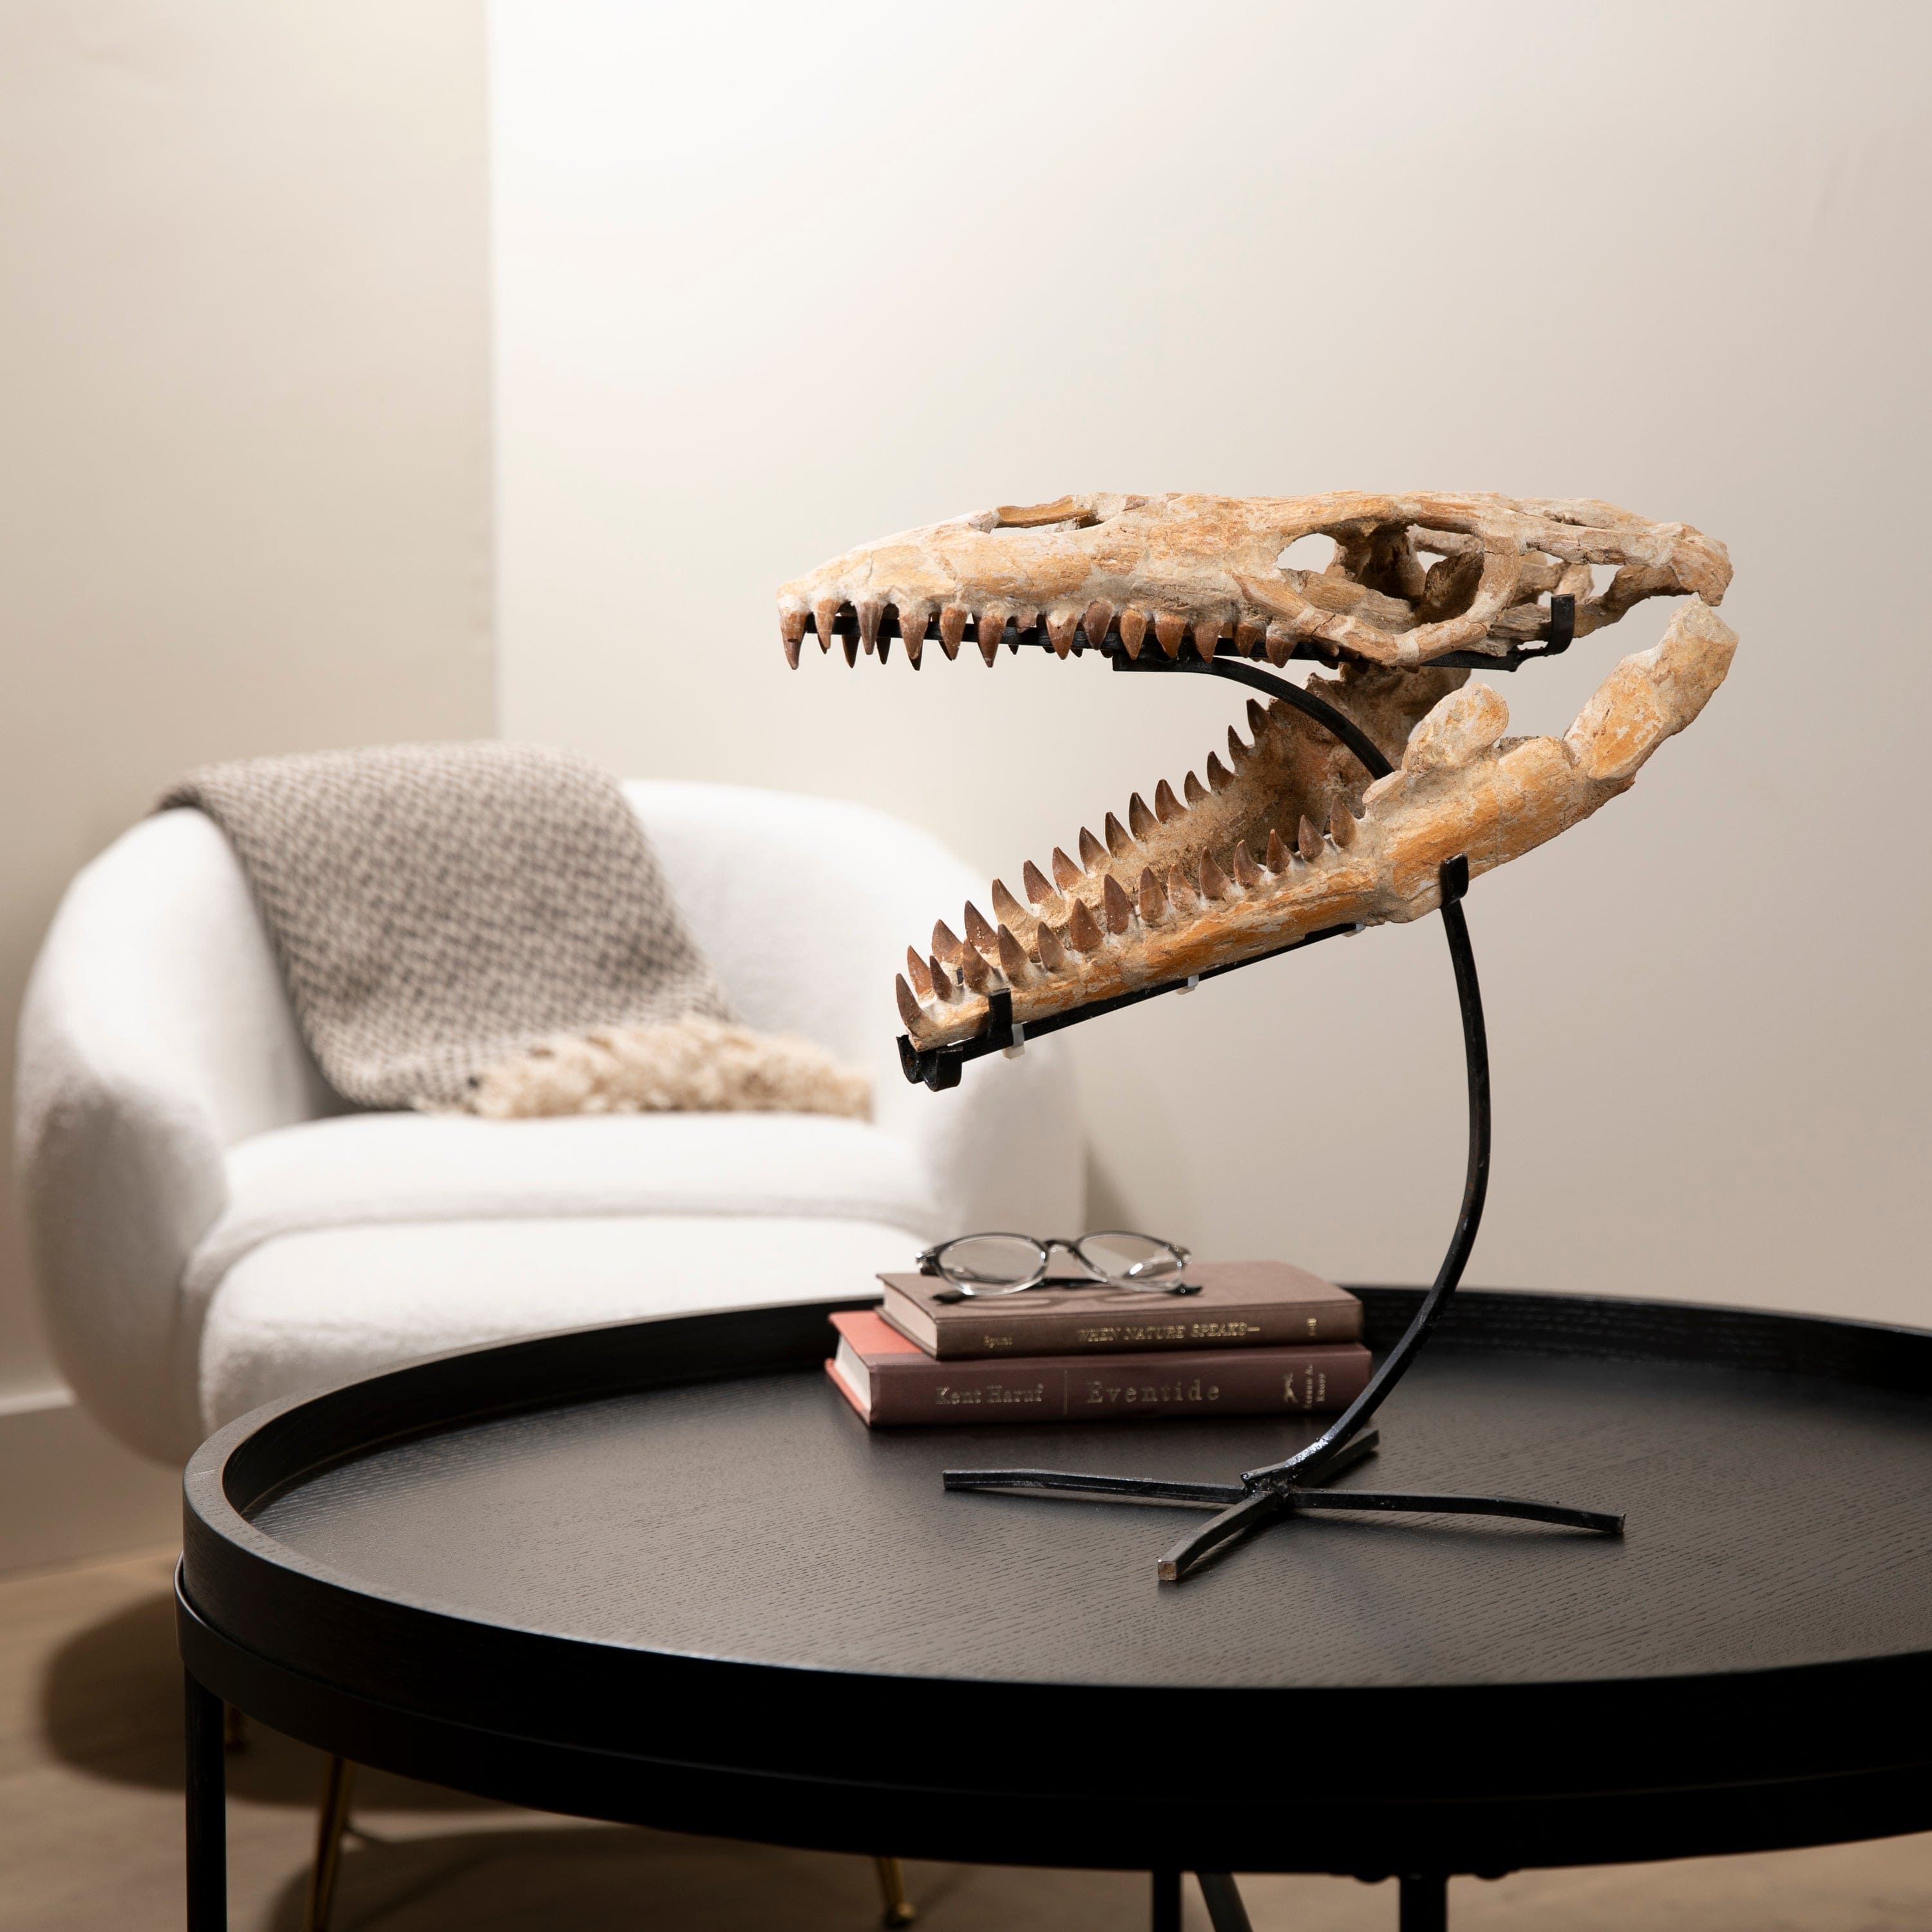 Kalifano Mosasaurus Fossils Moroccan Mosasaurus Jaw Fossil  on Custom Stand - 17" MOST30000.001